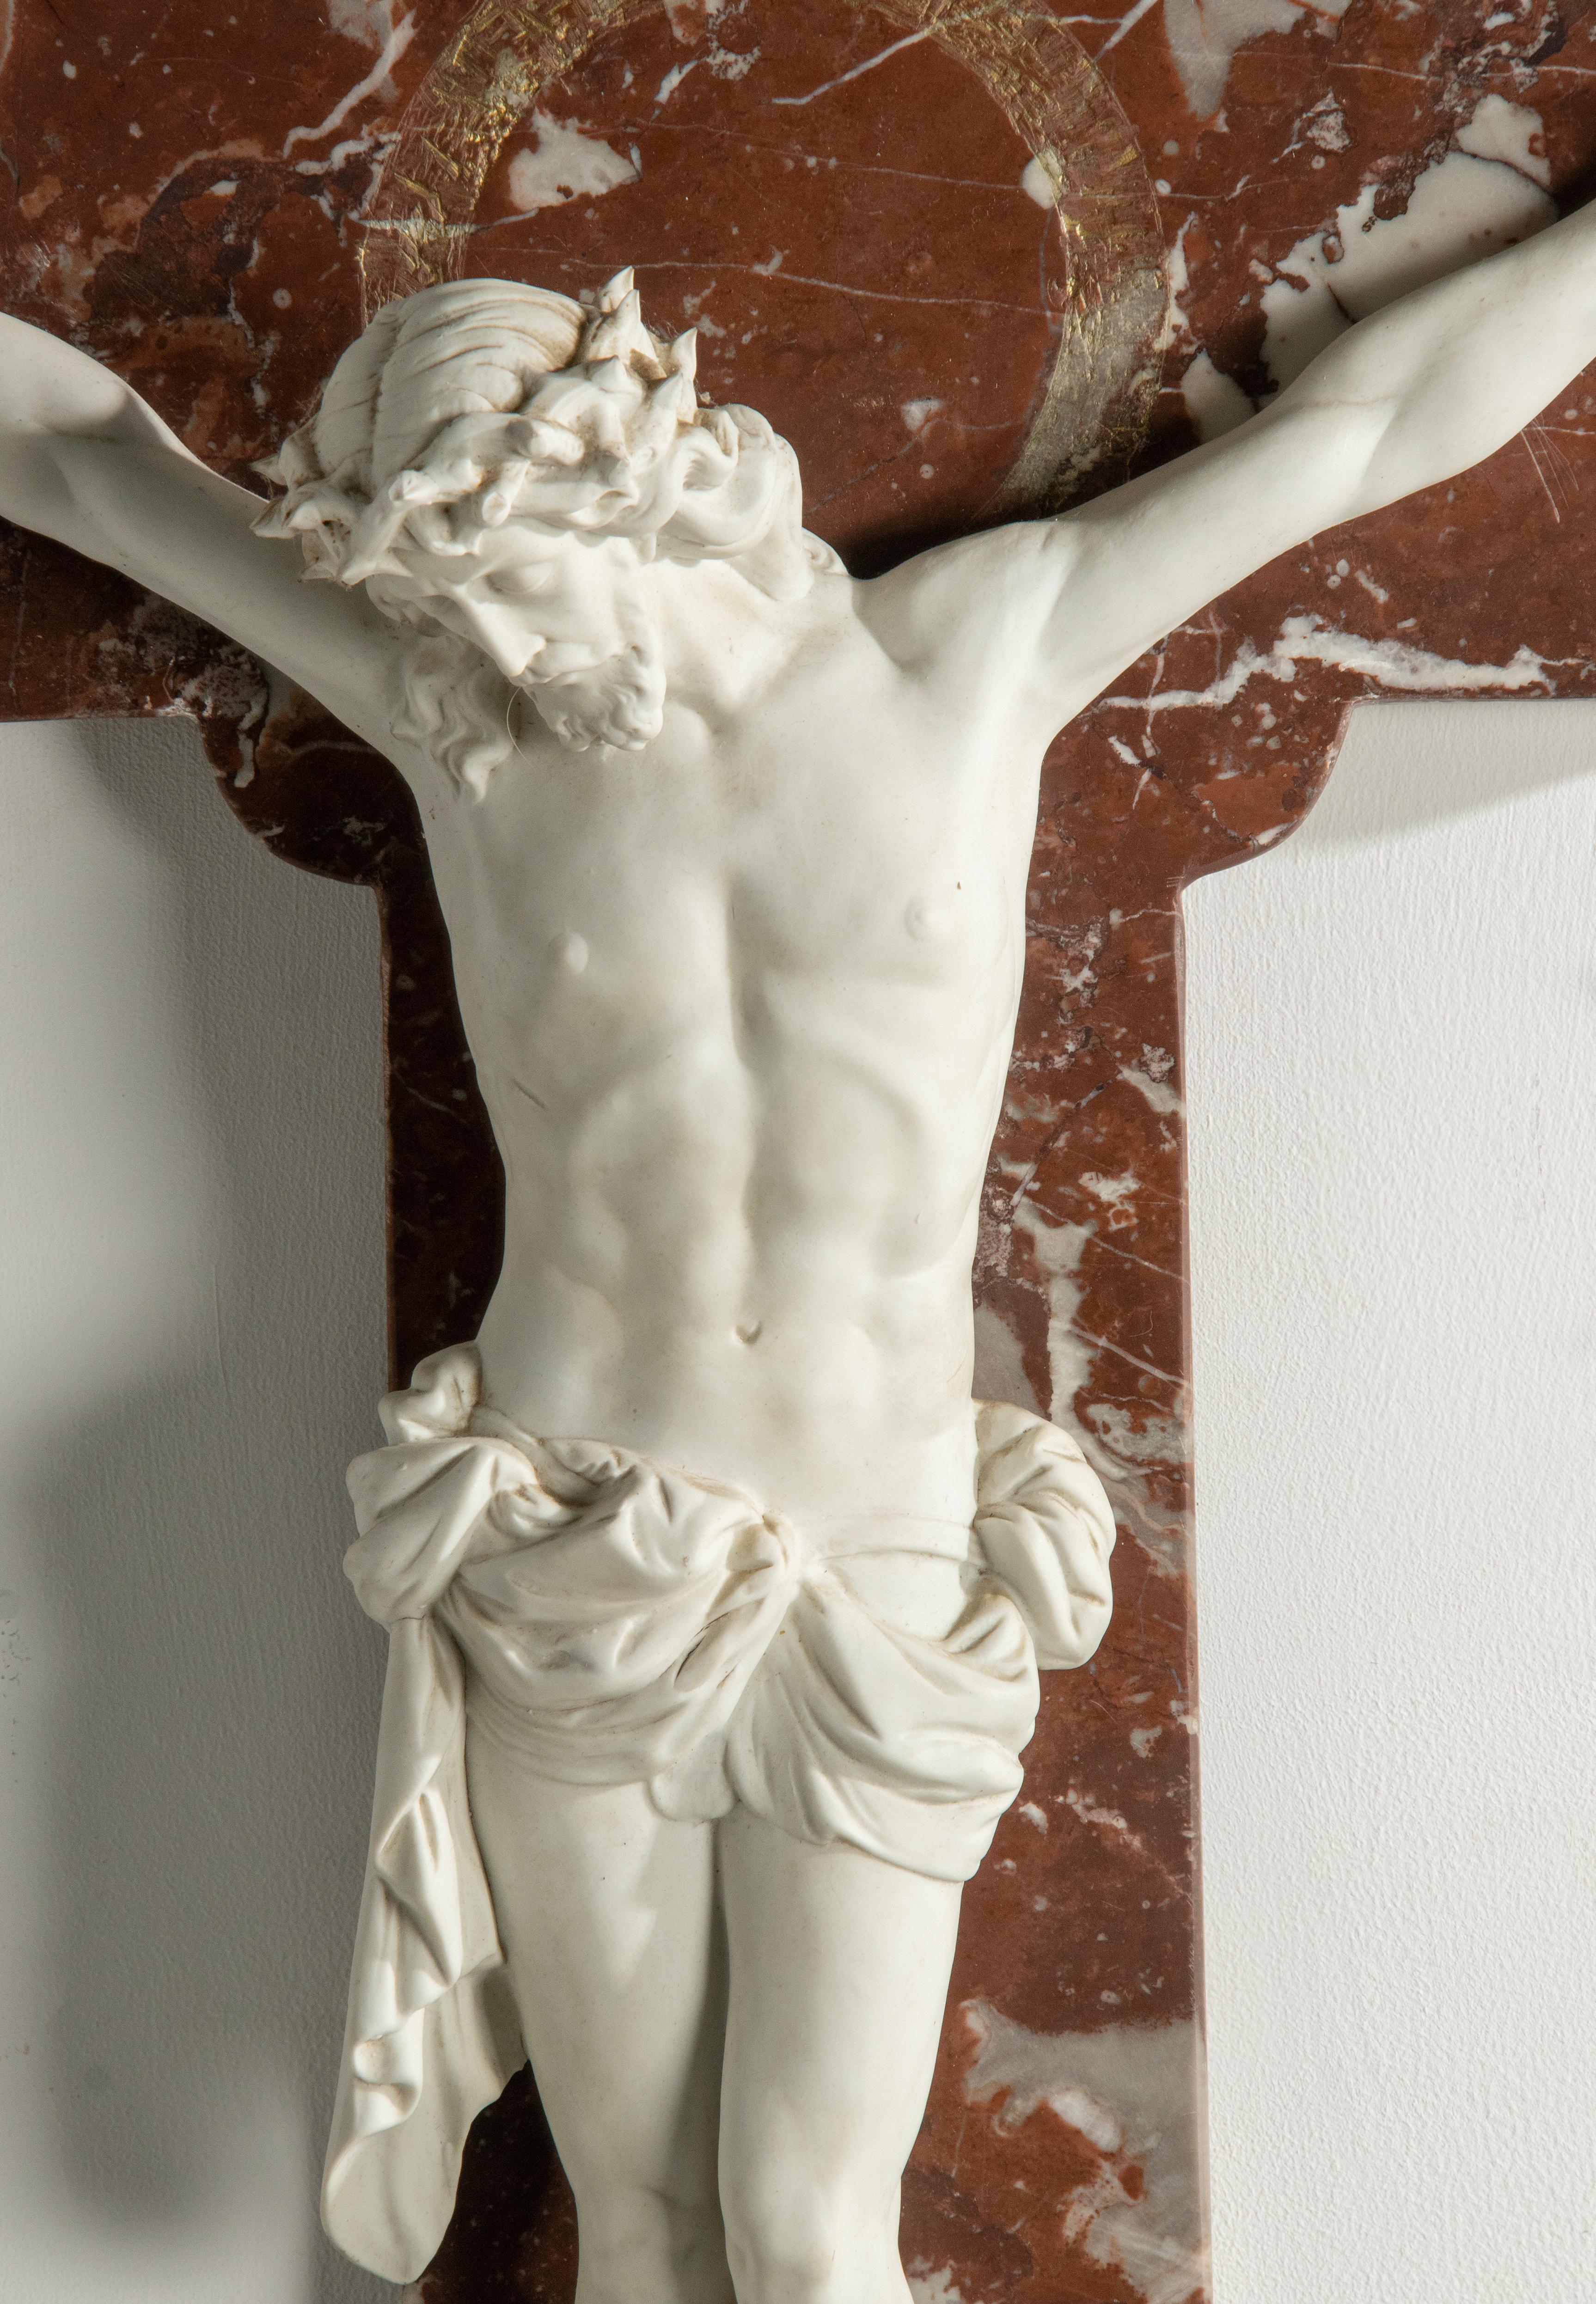 the life of christ captured in beautiful limoges porcelain